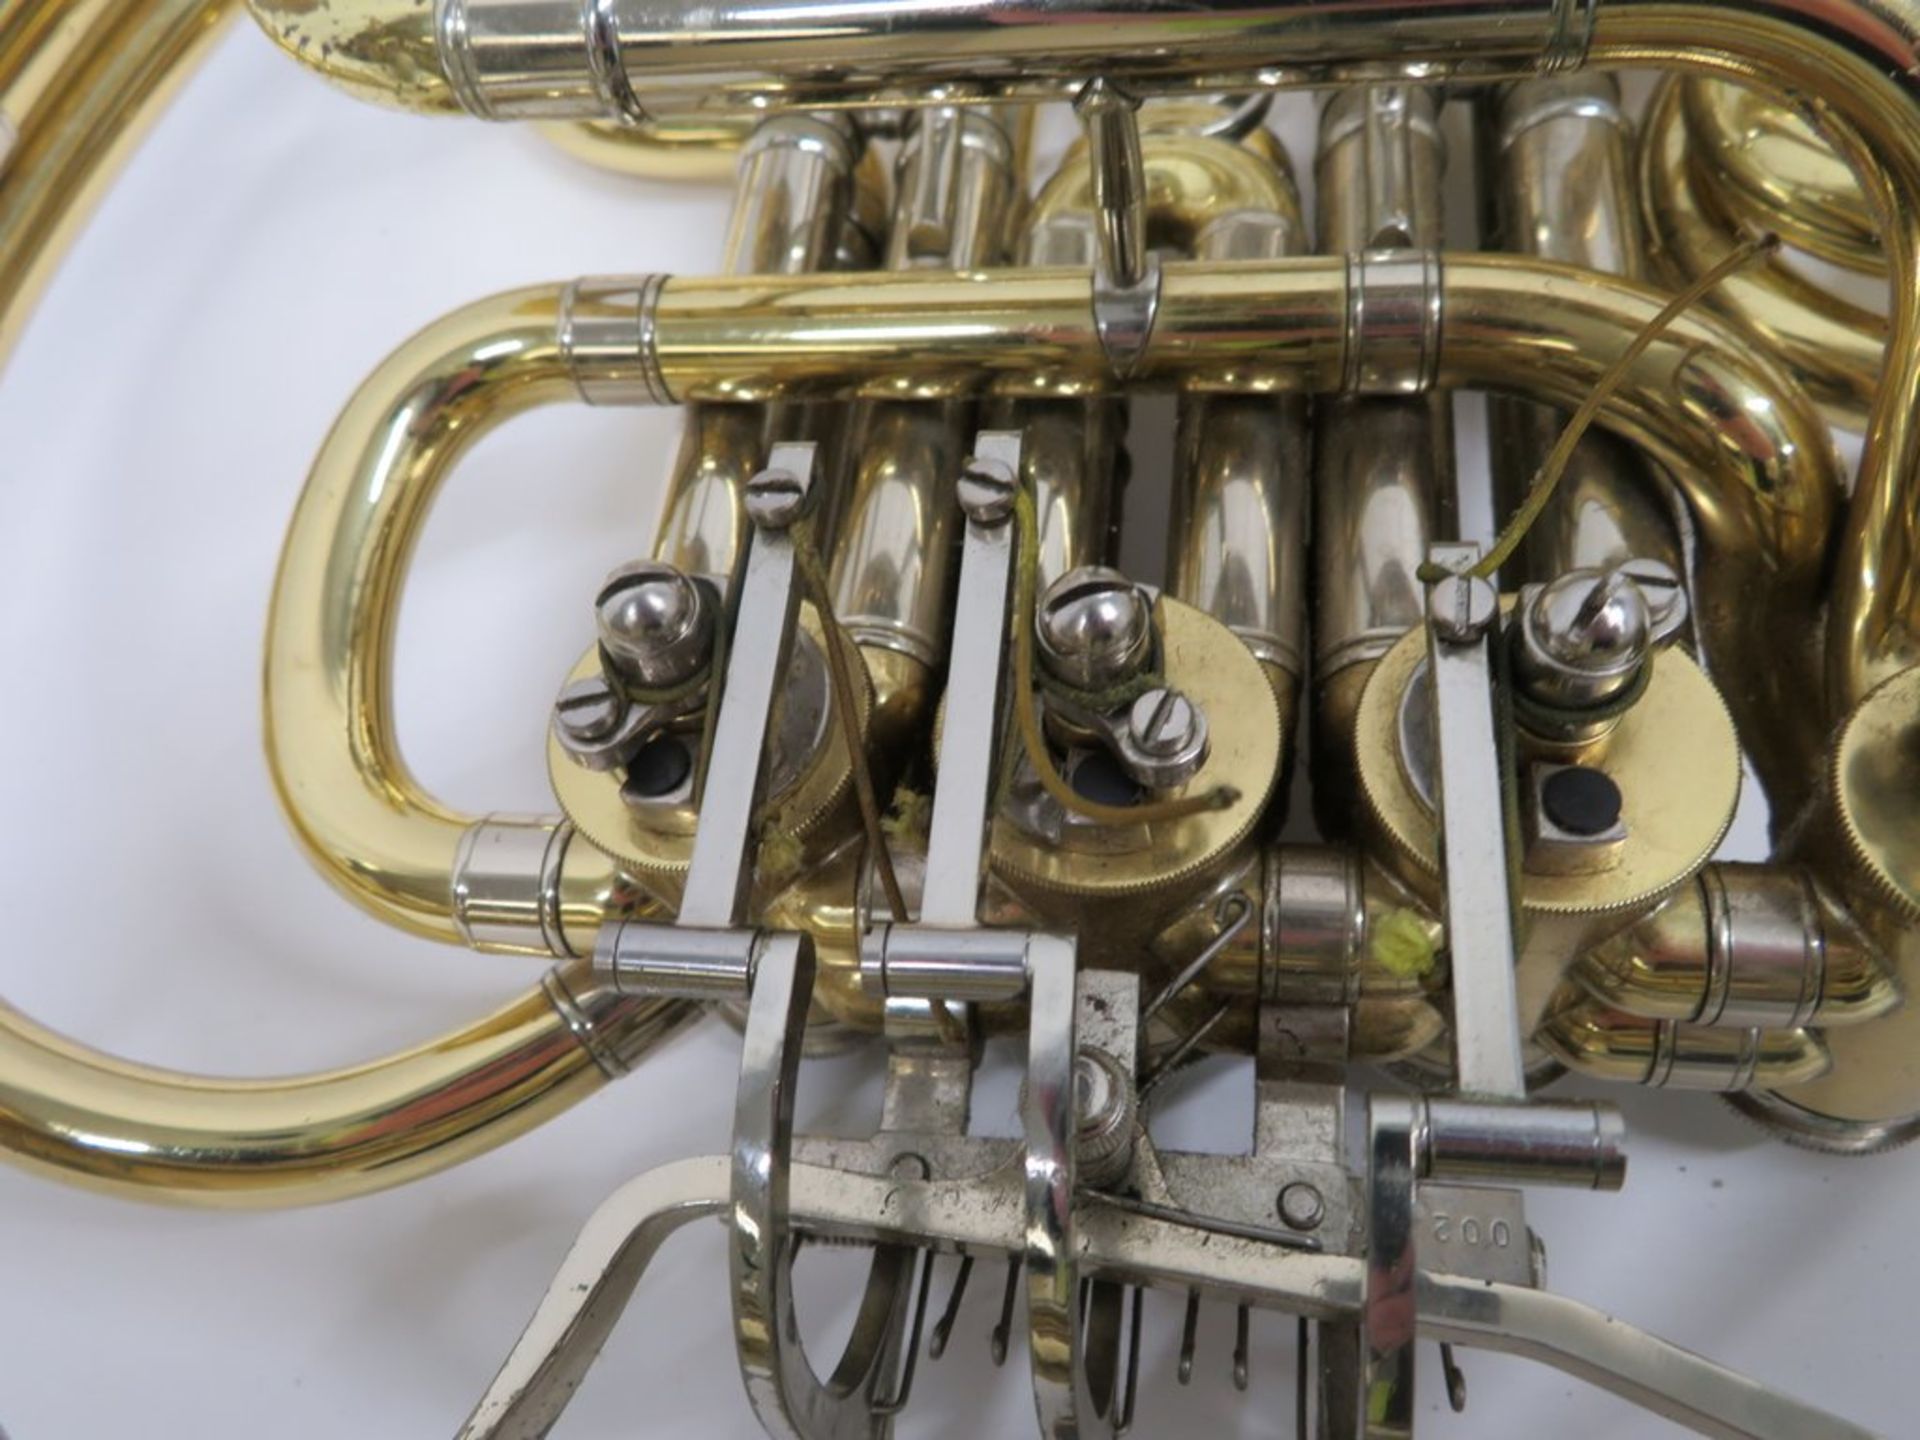 Yamaha YHR 667V French Horn With Case. Serial Number: 002437. This Item Has Not Been Teste - Image 11 of 13